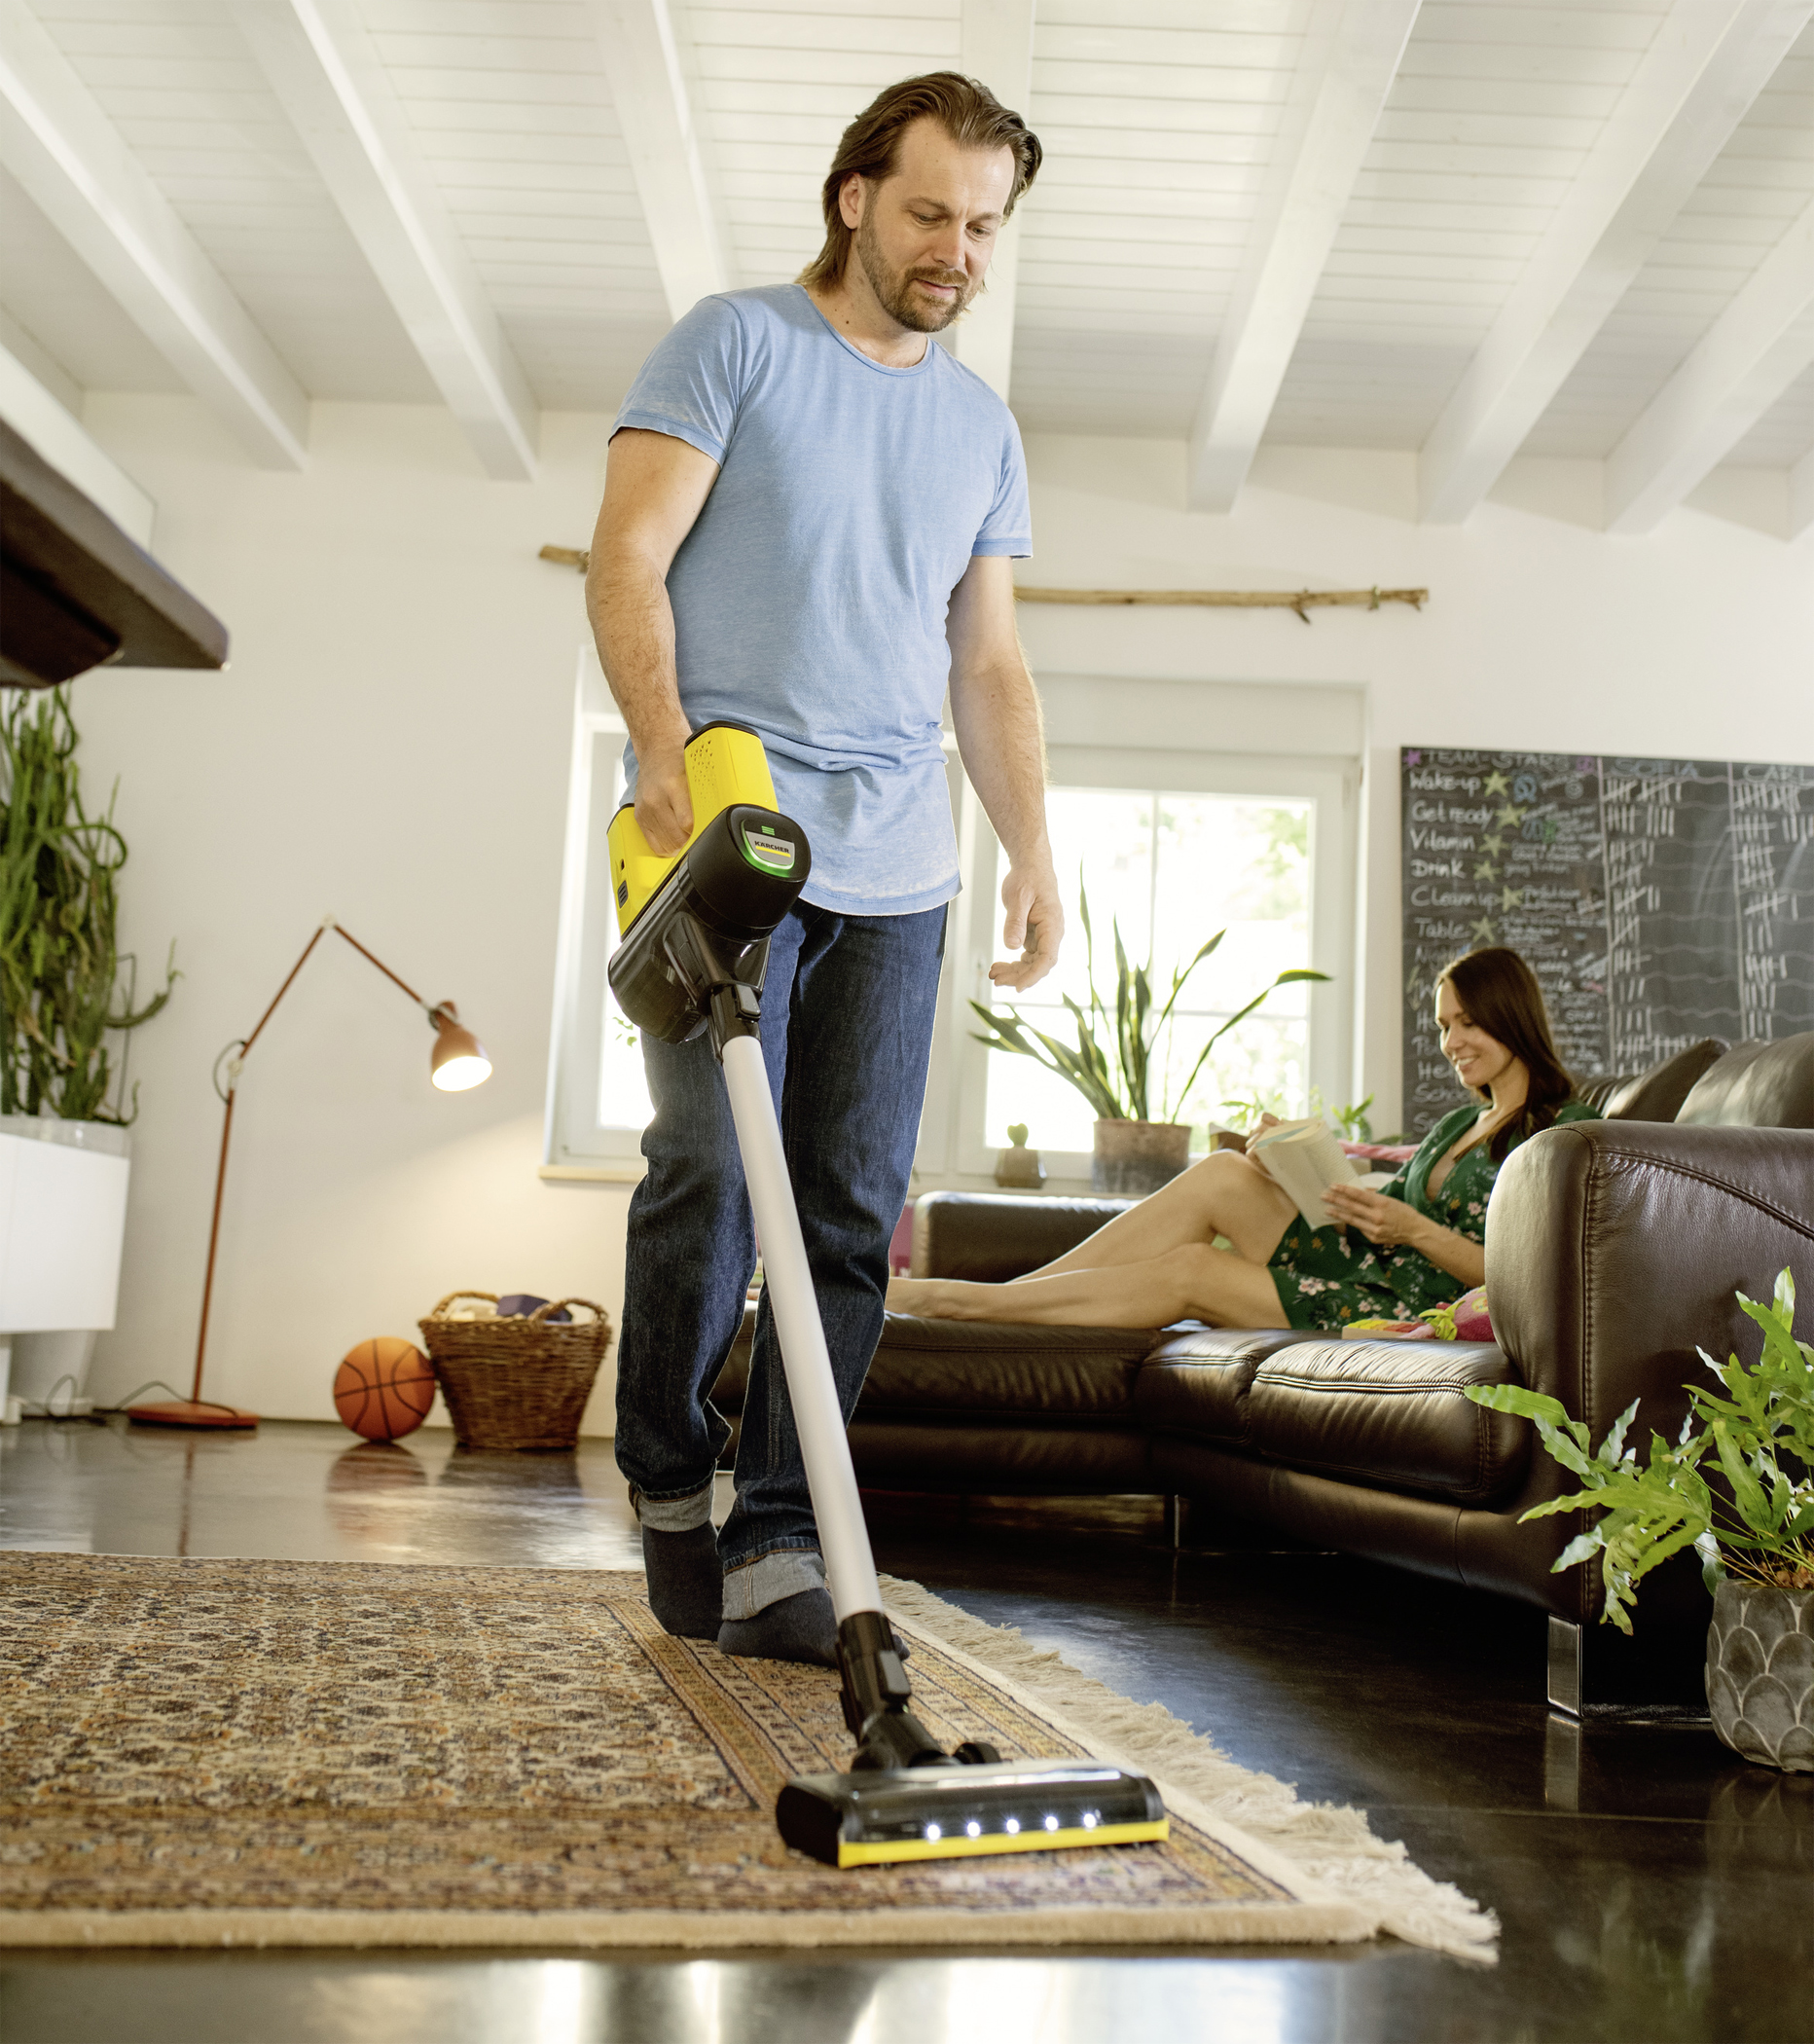 Vc 6 cordless ourfamily pet. Аккумуляторный пылесос Karcher VC 6. Керхер VC 6 Cordless. Аккумуляторный пылесос Karcher VC 6 Cordless our Family Limited Edition. Пылесос Керхер VC 6 Cordless Premium our Family.